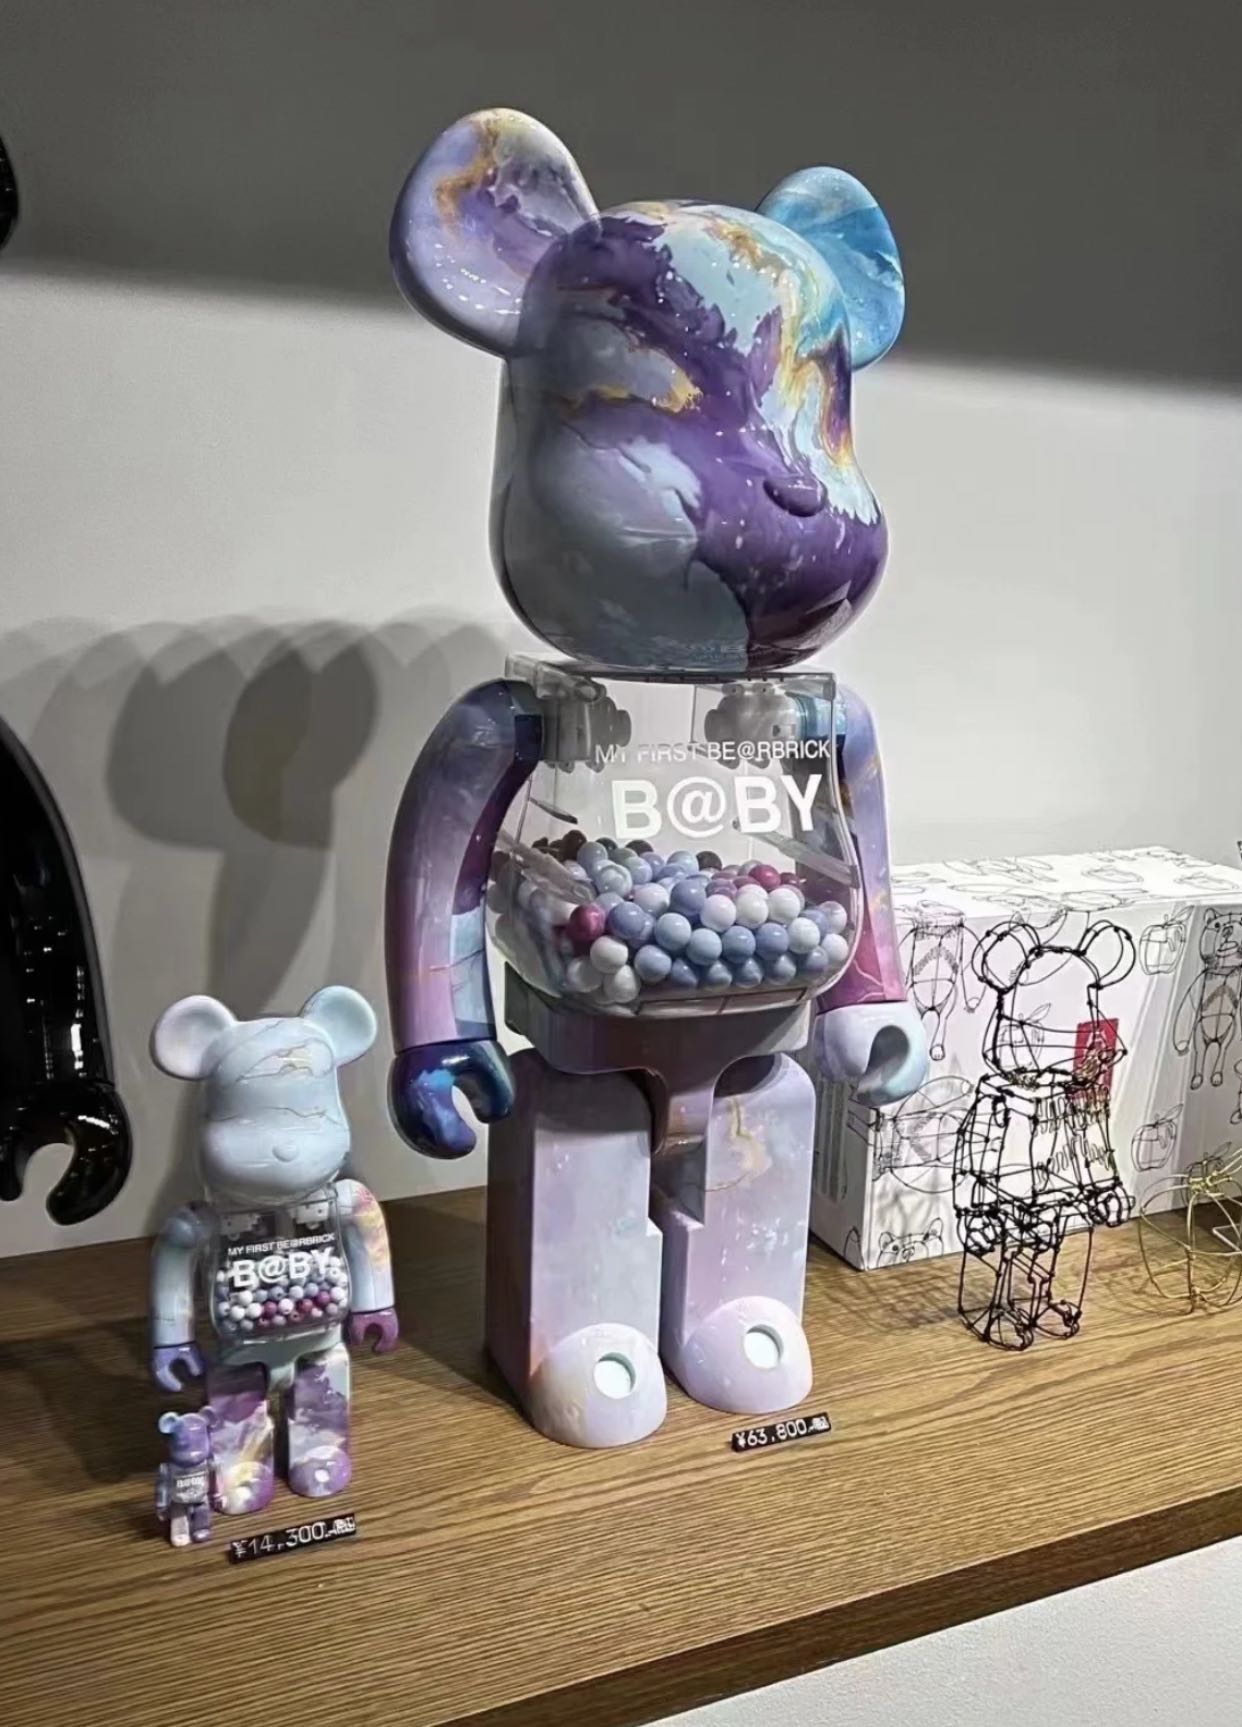 SALE最新作MY FIRST BE@RBRICK B@BY MARBLE 100％400％ その他